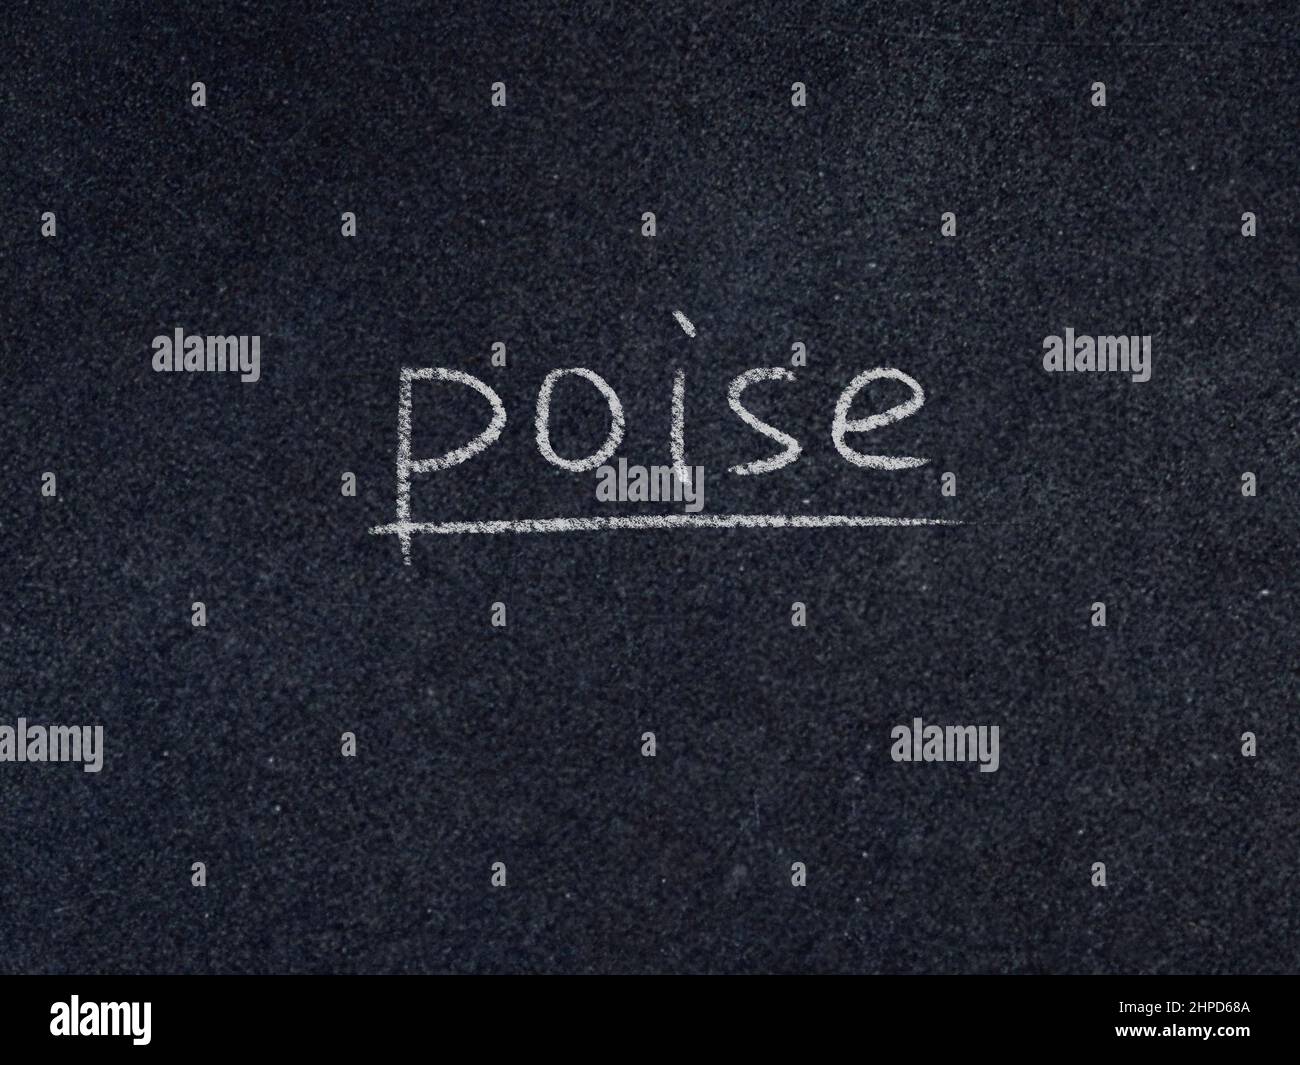 poise concept word on blackboard background Stock Photo